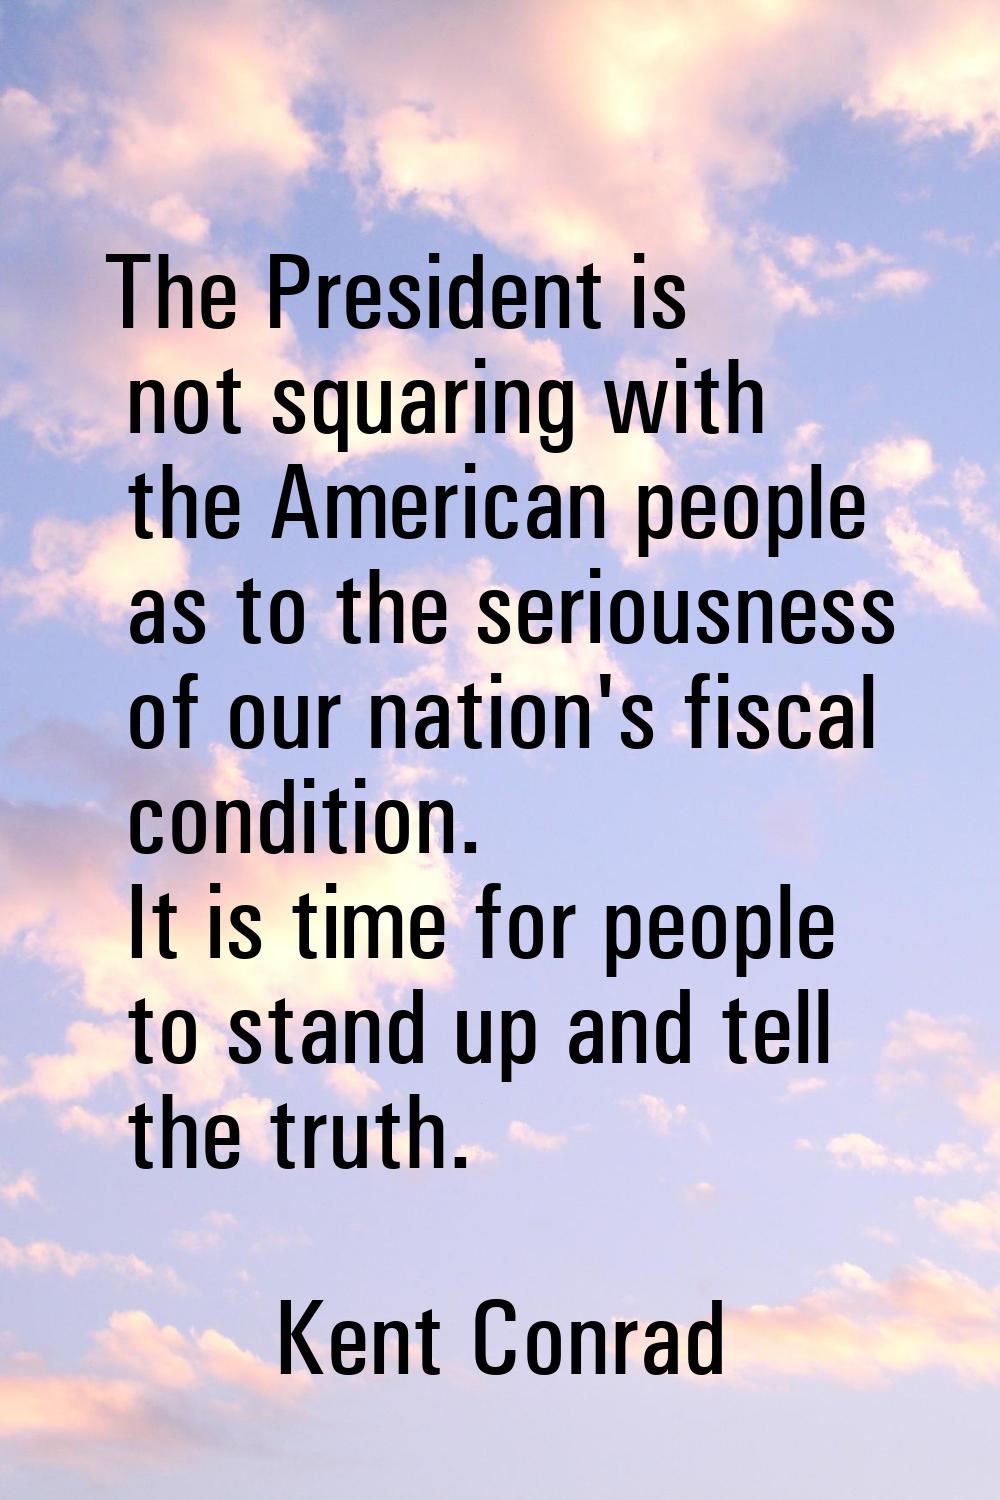 The President is not squaring with the American people as to the seriousness of our nation's fiscal